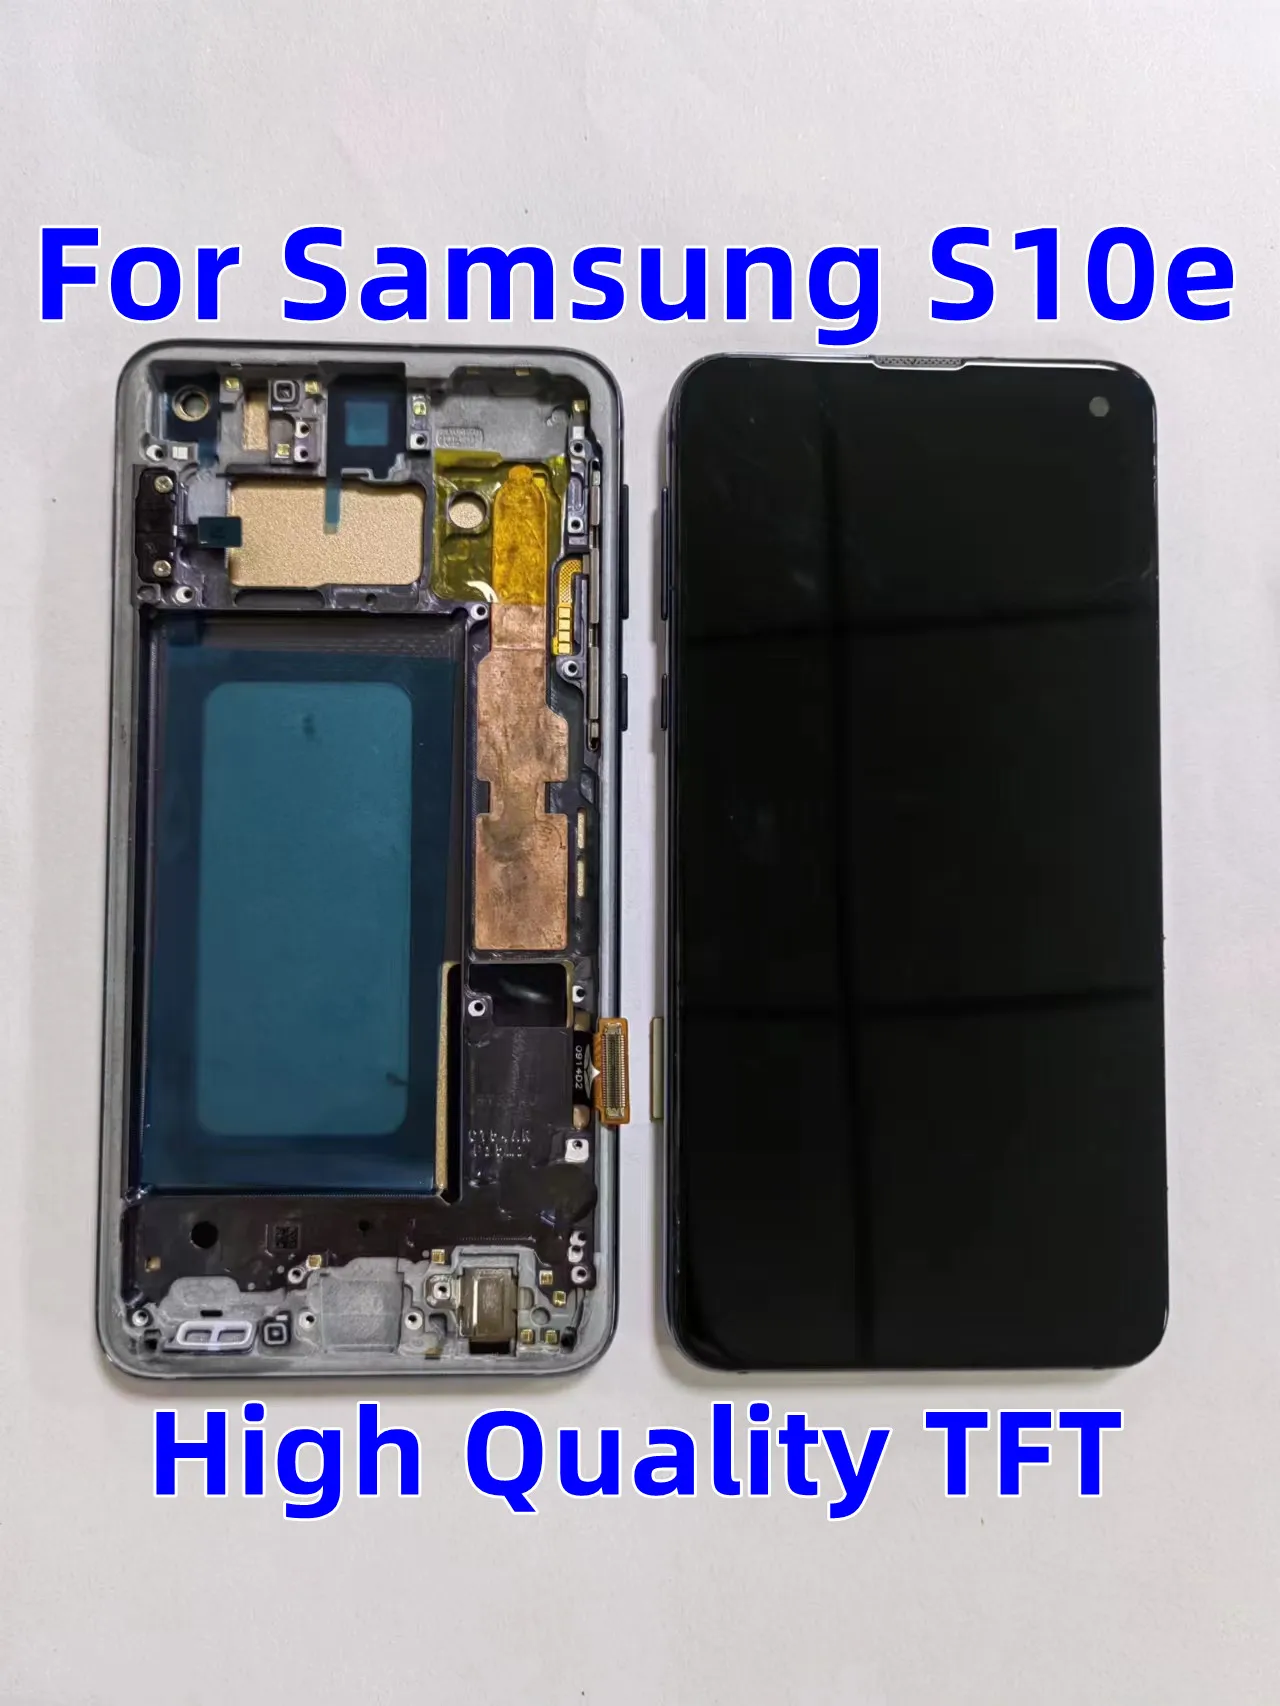 Enlarge High Quality TFT For Samsung Galaxy S10e G970F G970U Display Touch ScreenDigitizer Assembly with Frame,Face recognition